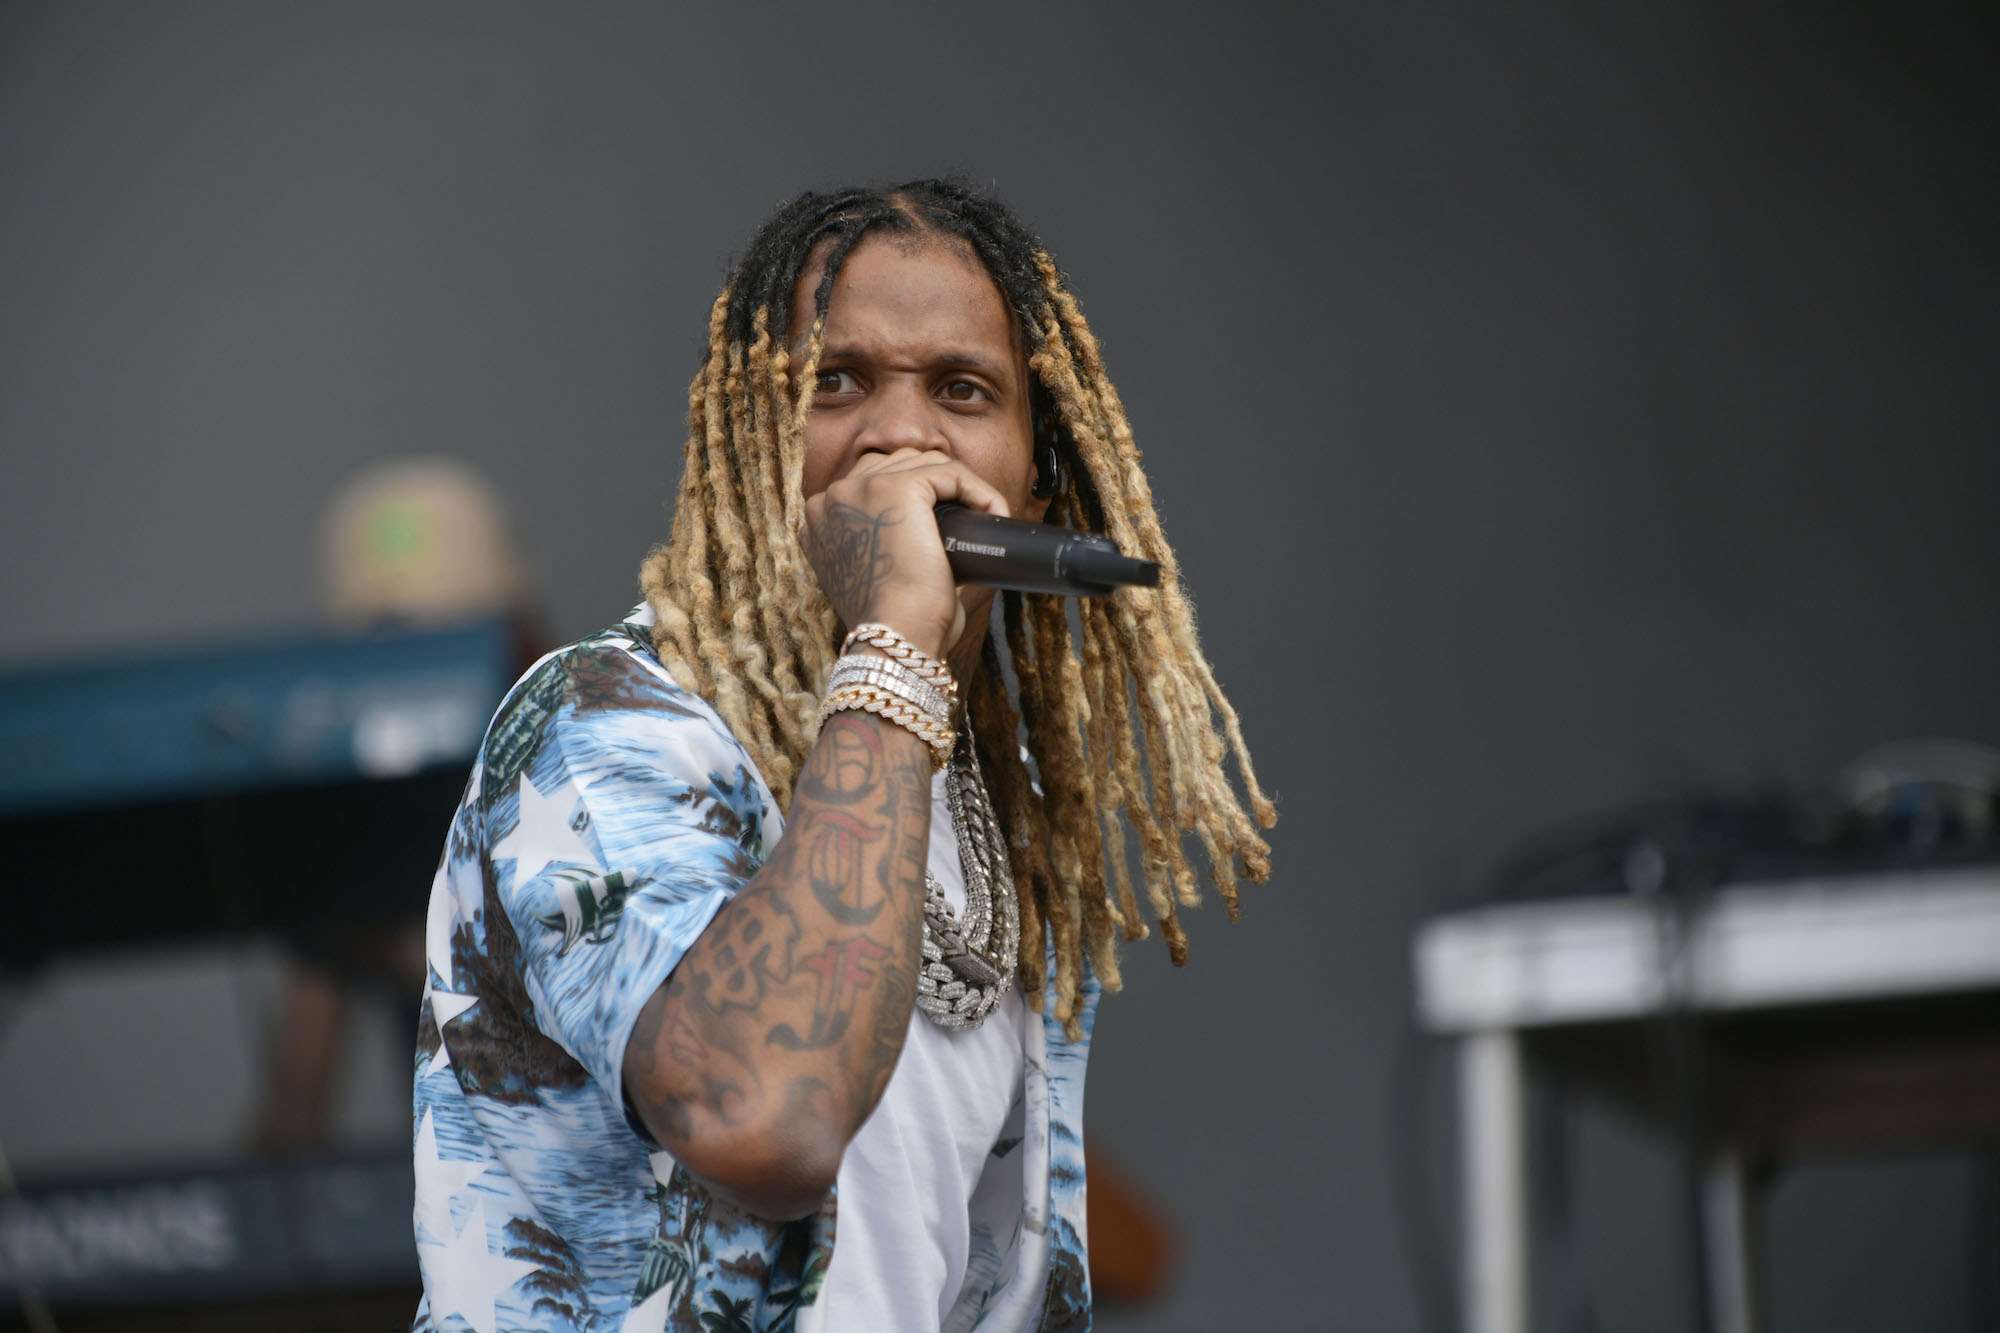 Lil Durk Live at Lollapalooza [GALLERY] 5